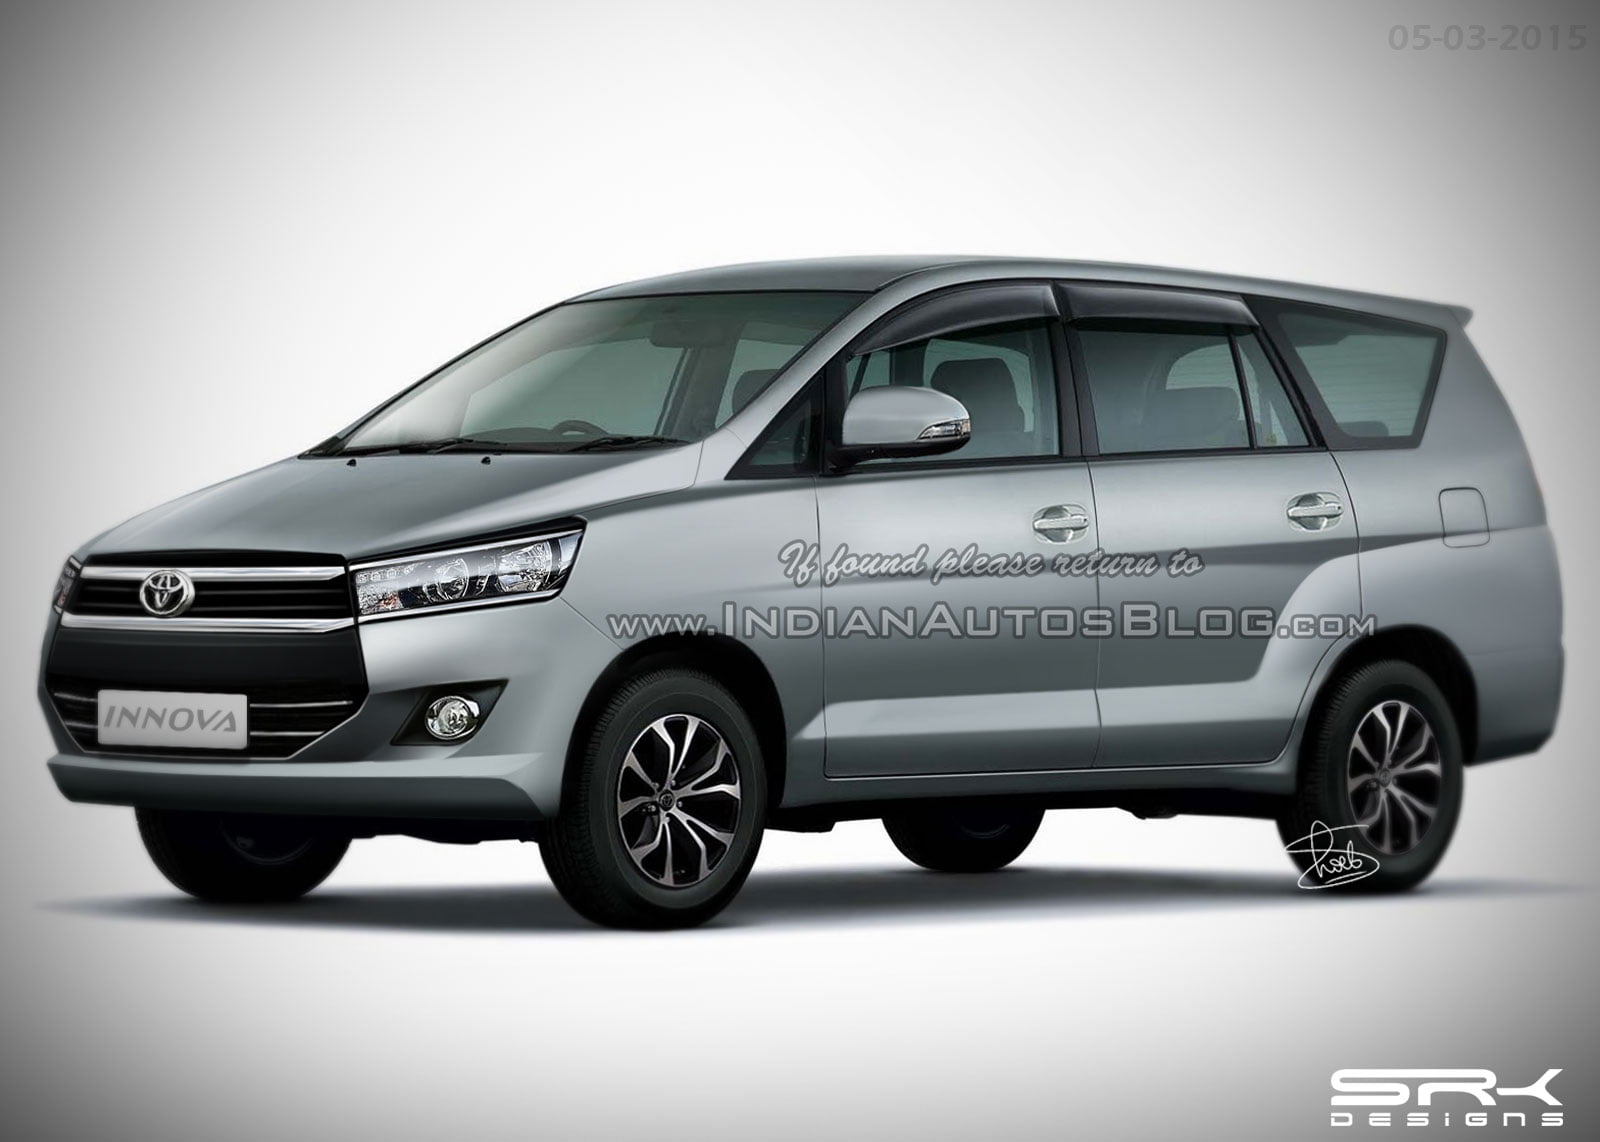 2016 Toyota Innova India Launch, Pics, Specification, Review